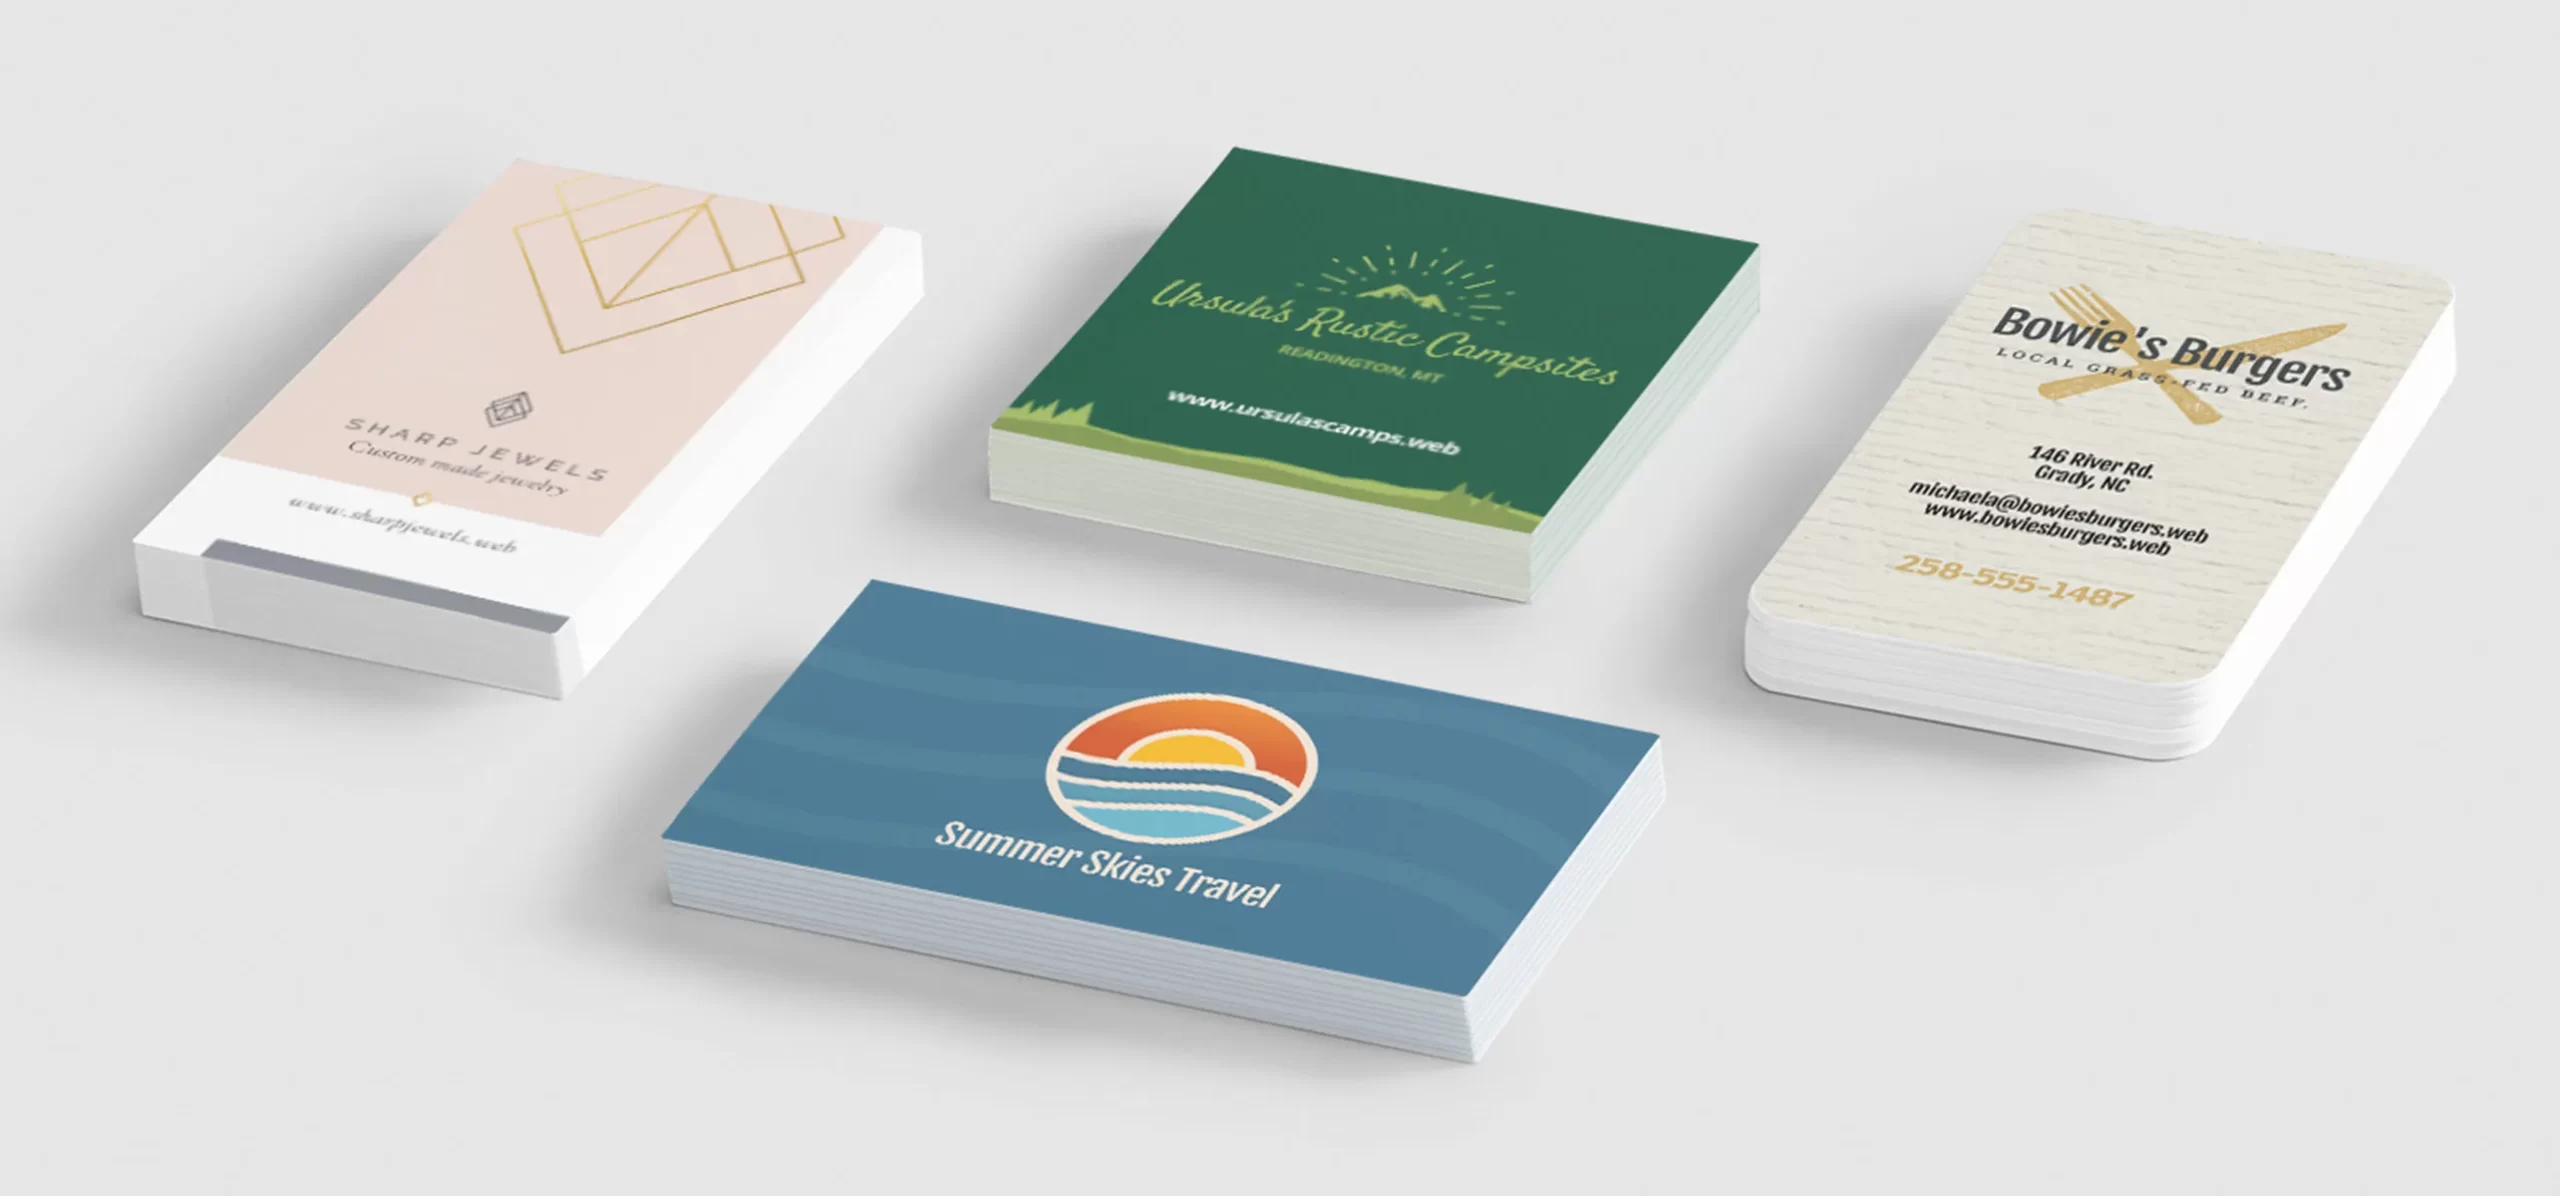 Does The Look And Design Of Your Business Card Matter?